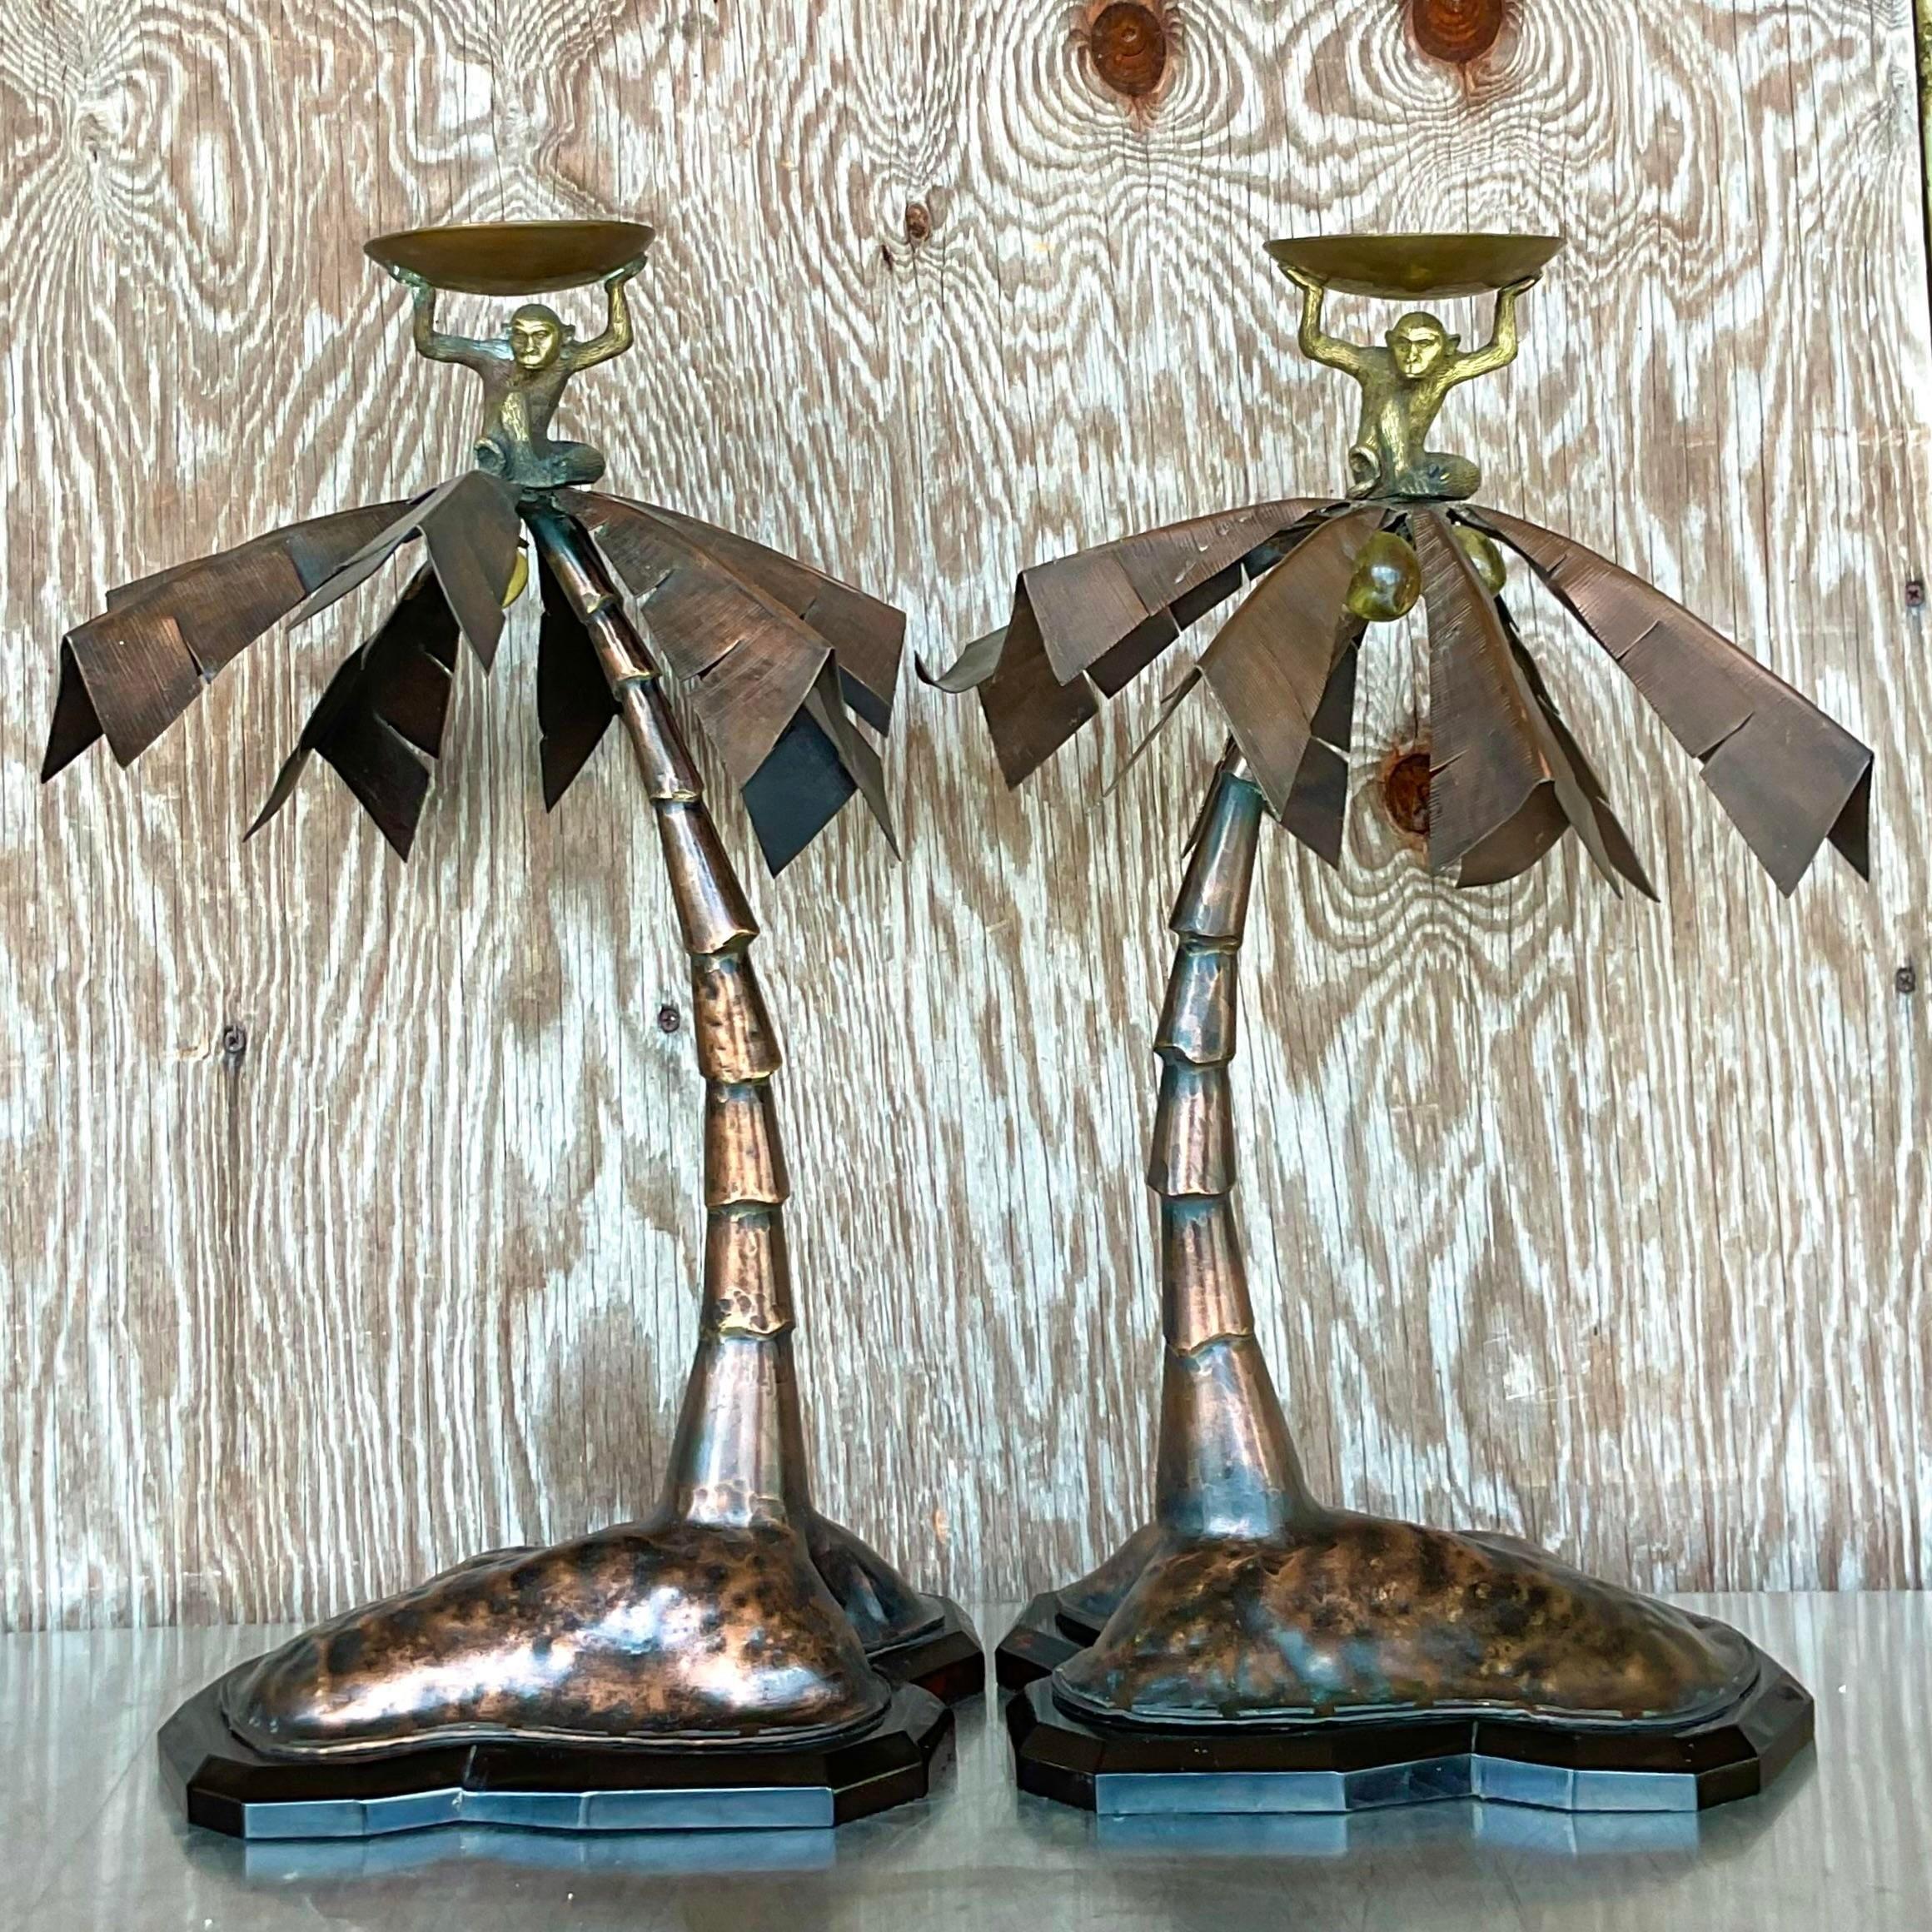 A fabulous pair of vintage Coastal candlesticks. Chic patinated metal palm trees with happy little monkeys holding up the plate for the candle. Little glass coconuts. Acquired from a Palm Beach estate.